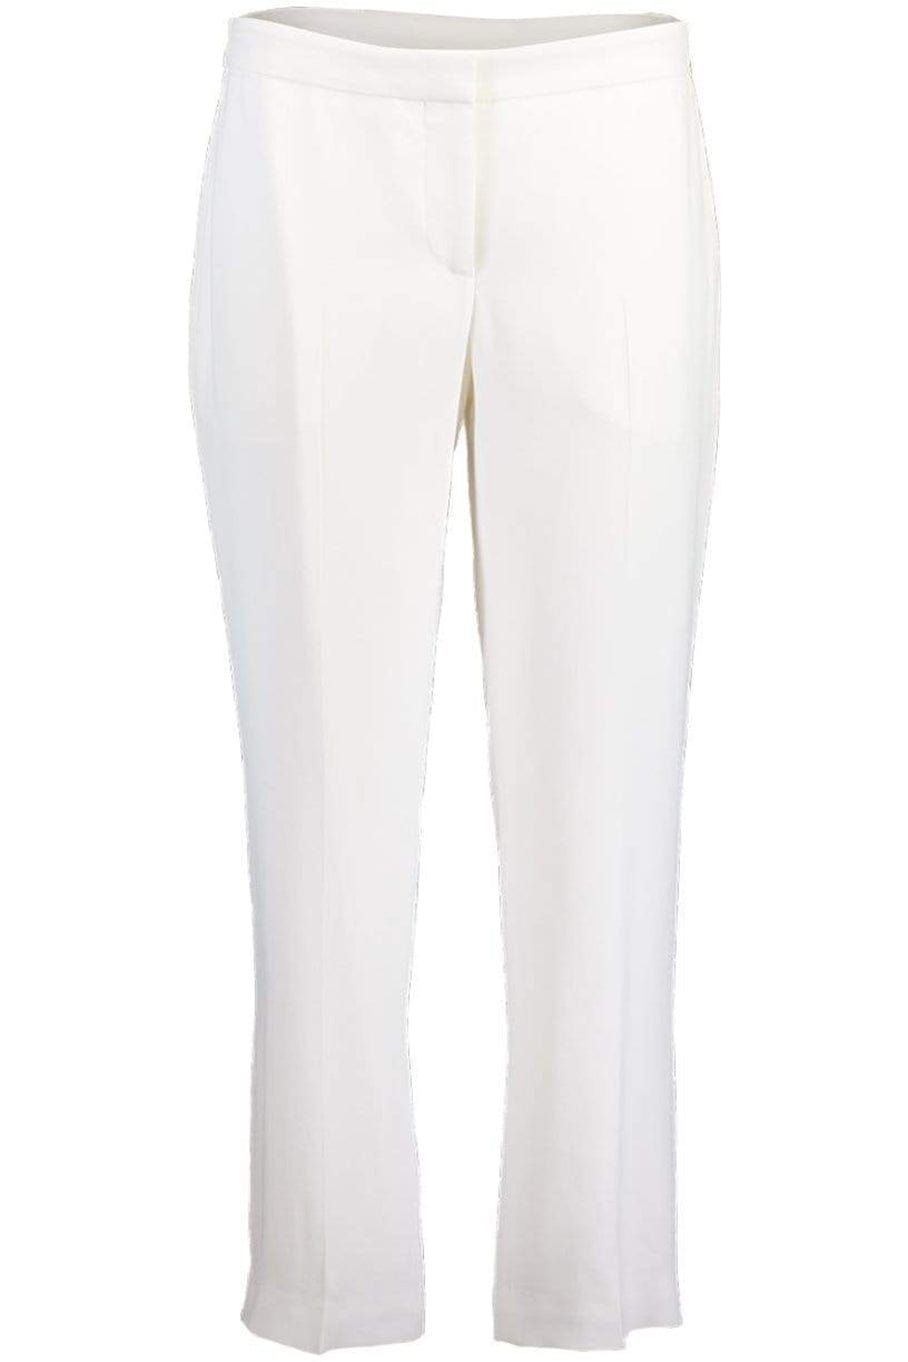 ALEXANDER MCQUEEN-Ivory Cropped Trouser-IVORY